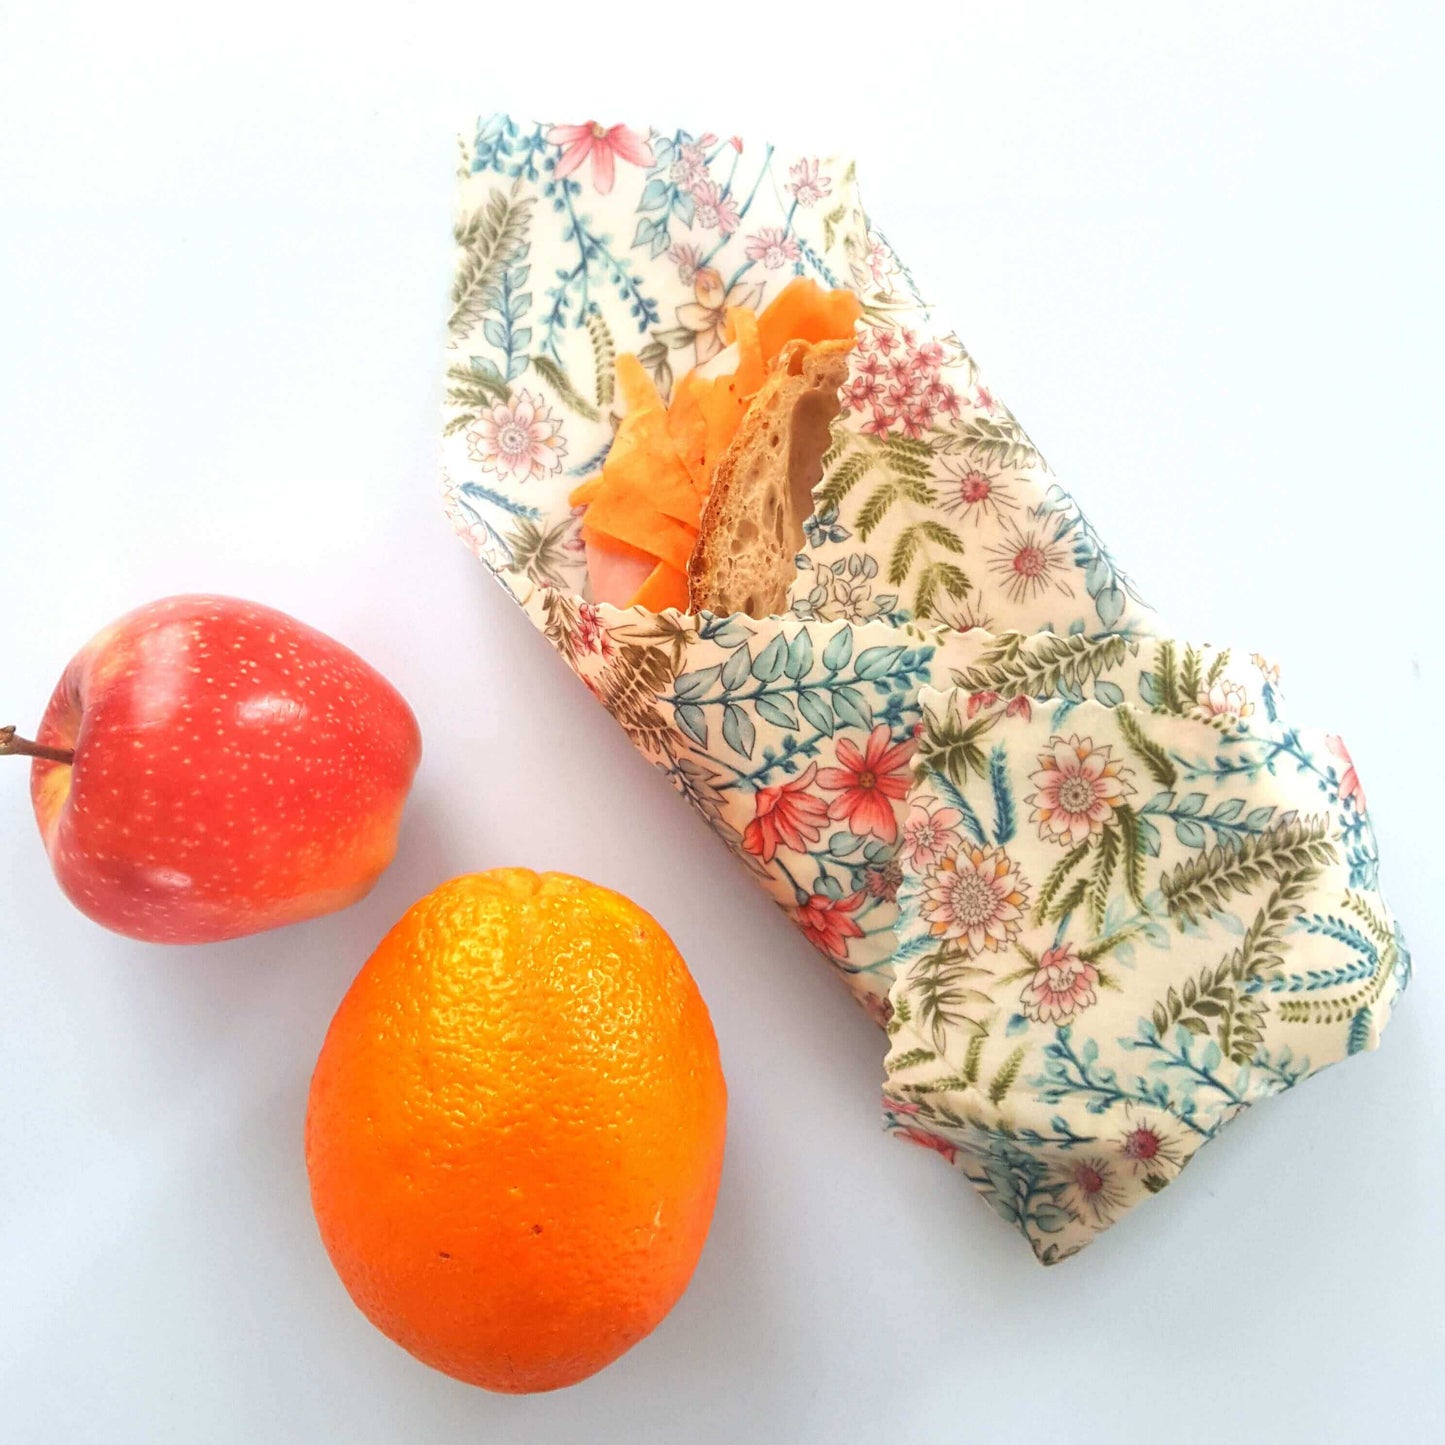 Planet-Kind single large beeswax wrap in Botanical pattern as flatlay